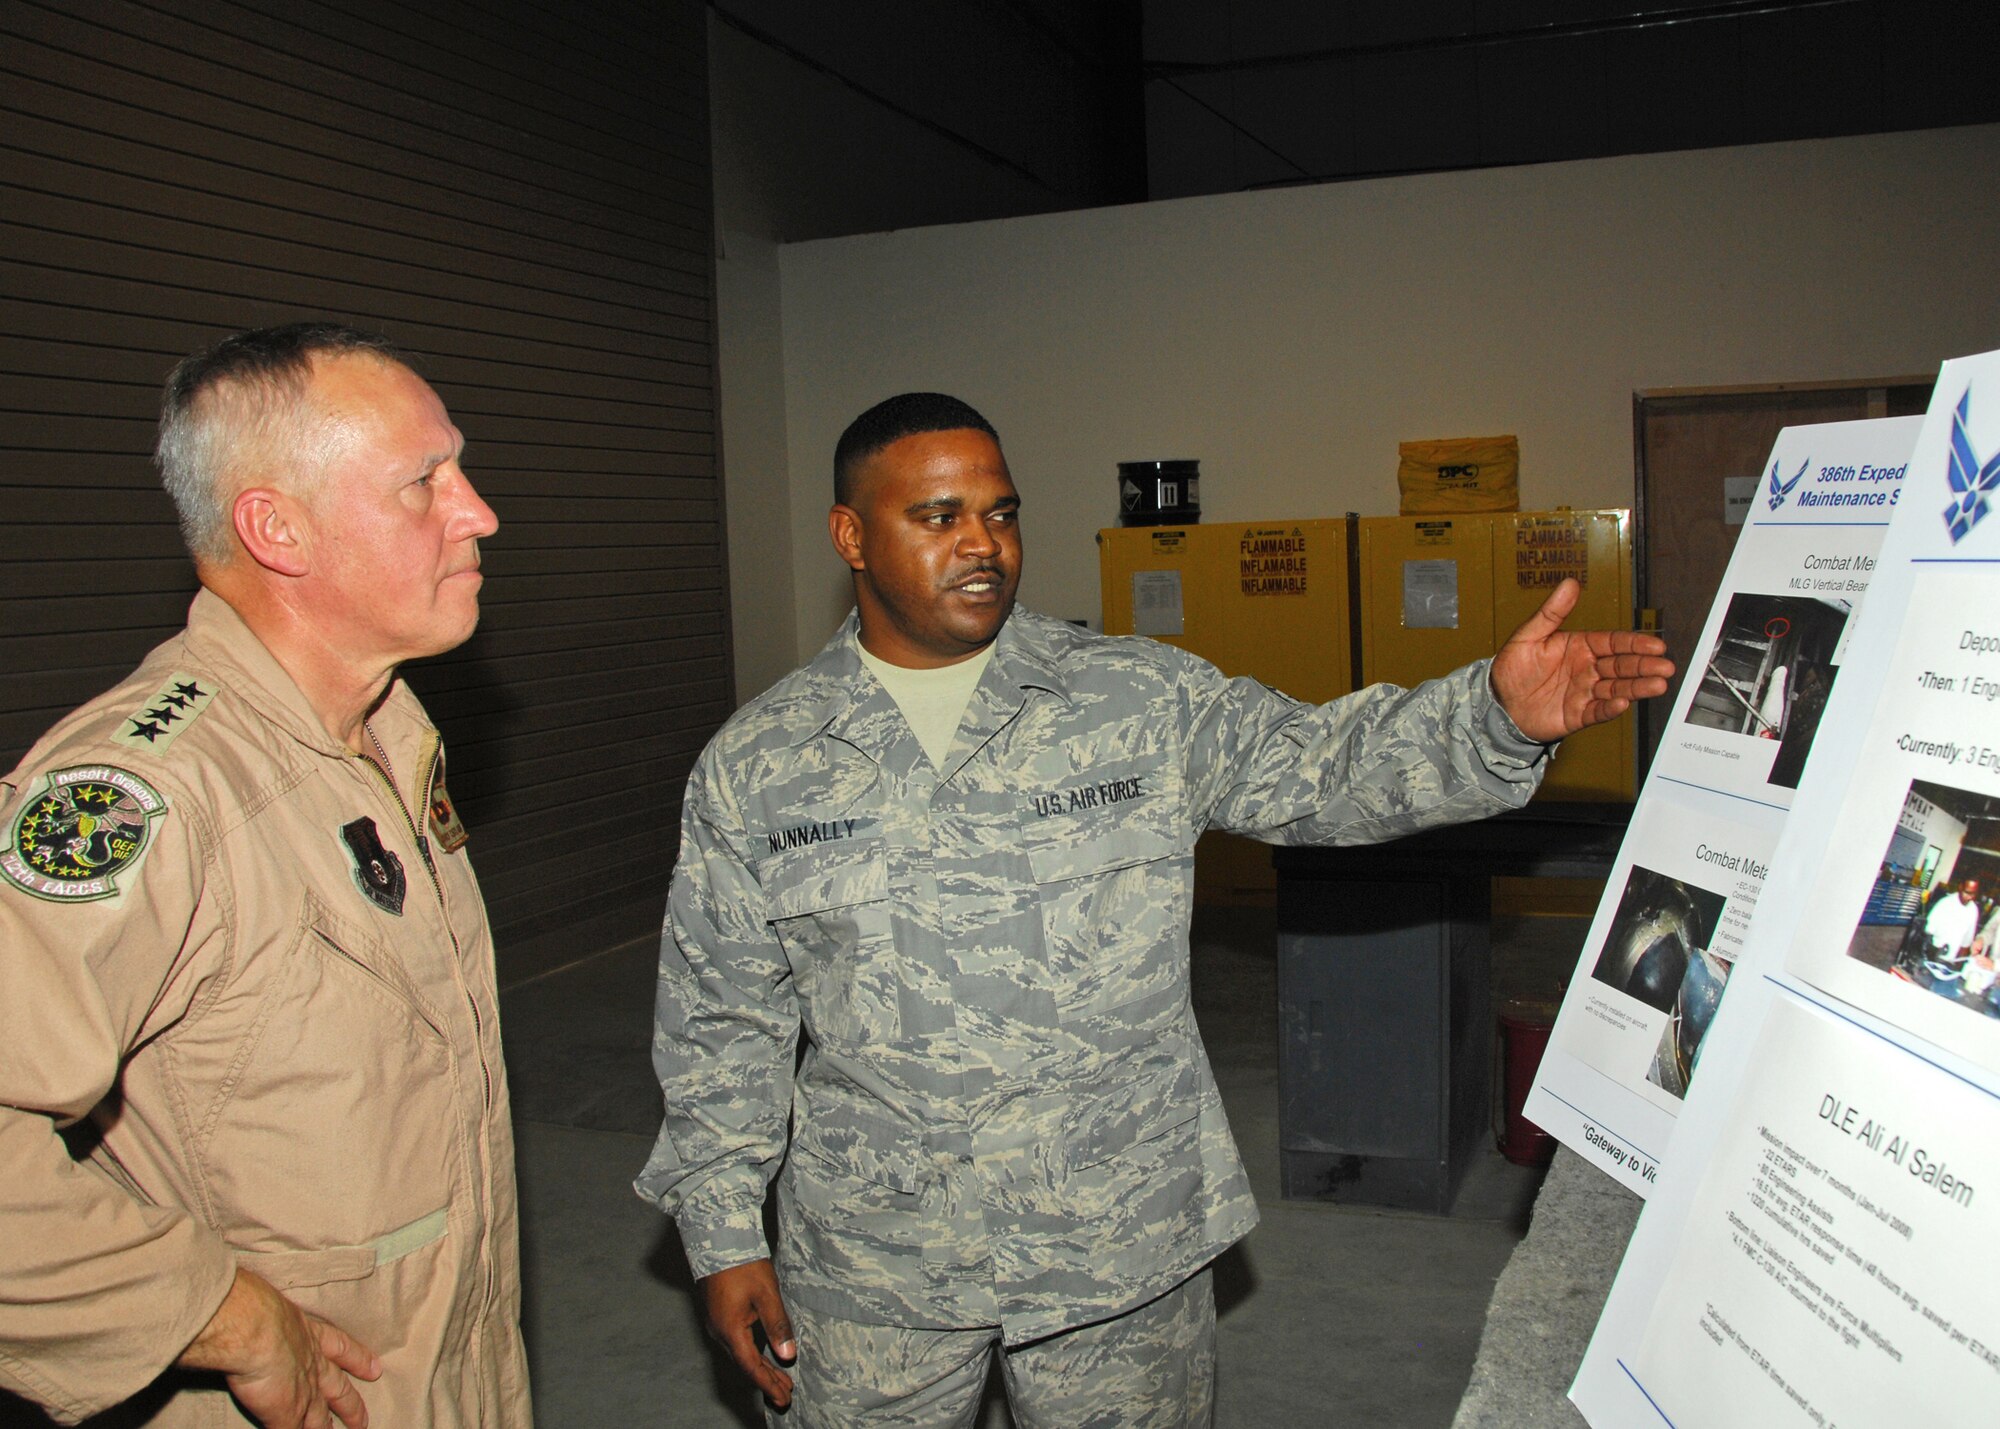 SOUTHWEST ASIA -- Gen. Bruce Carlson, commander of Air Force Materiel Command, listens to a briefing from Staff Sgt. Shareef Nunnally, Structural Maintenance NCO in charge, on Aug. 18 about the Combat Metals shop's fabrication and repair efforts to keep C-130s flying at an air base in Southwest Asia. General Carlson met with members of the 386th Air Expeditionary Wing to see how AFMC can assist with current operations in the U.S. Central Command area of responsibility. (U.S. Air Force photo/Tech. Sgt. Raheem Moore)